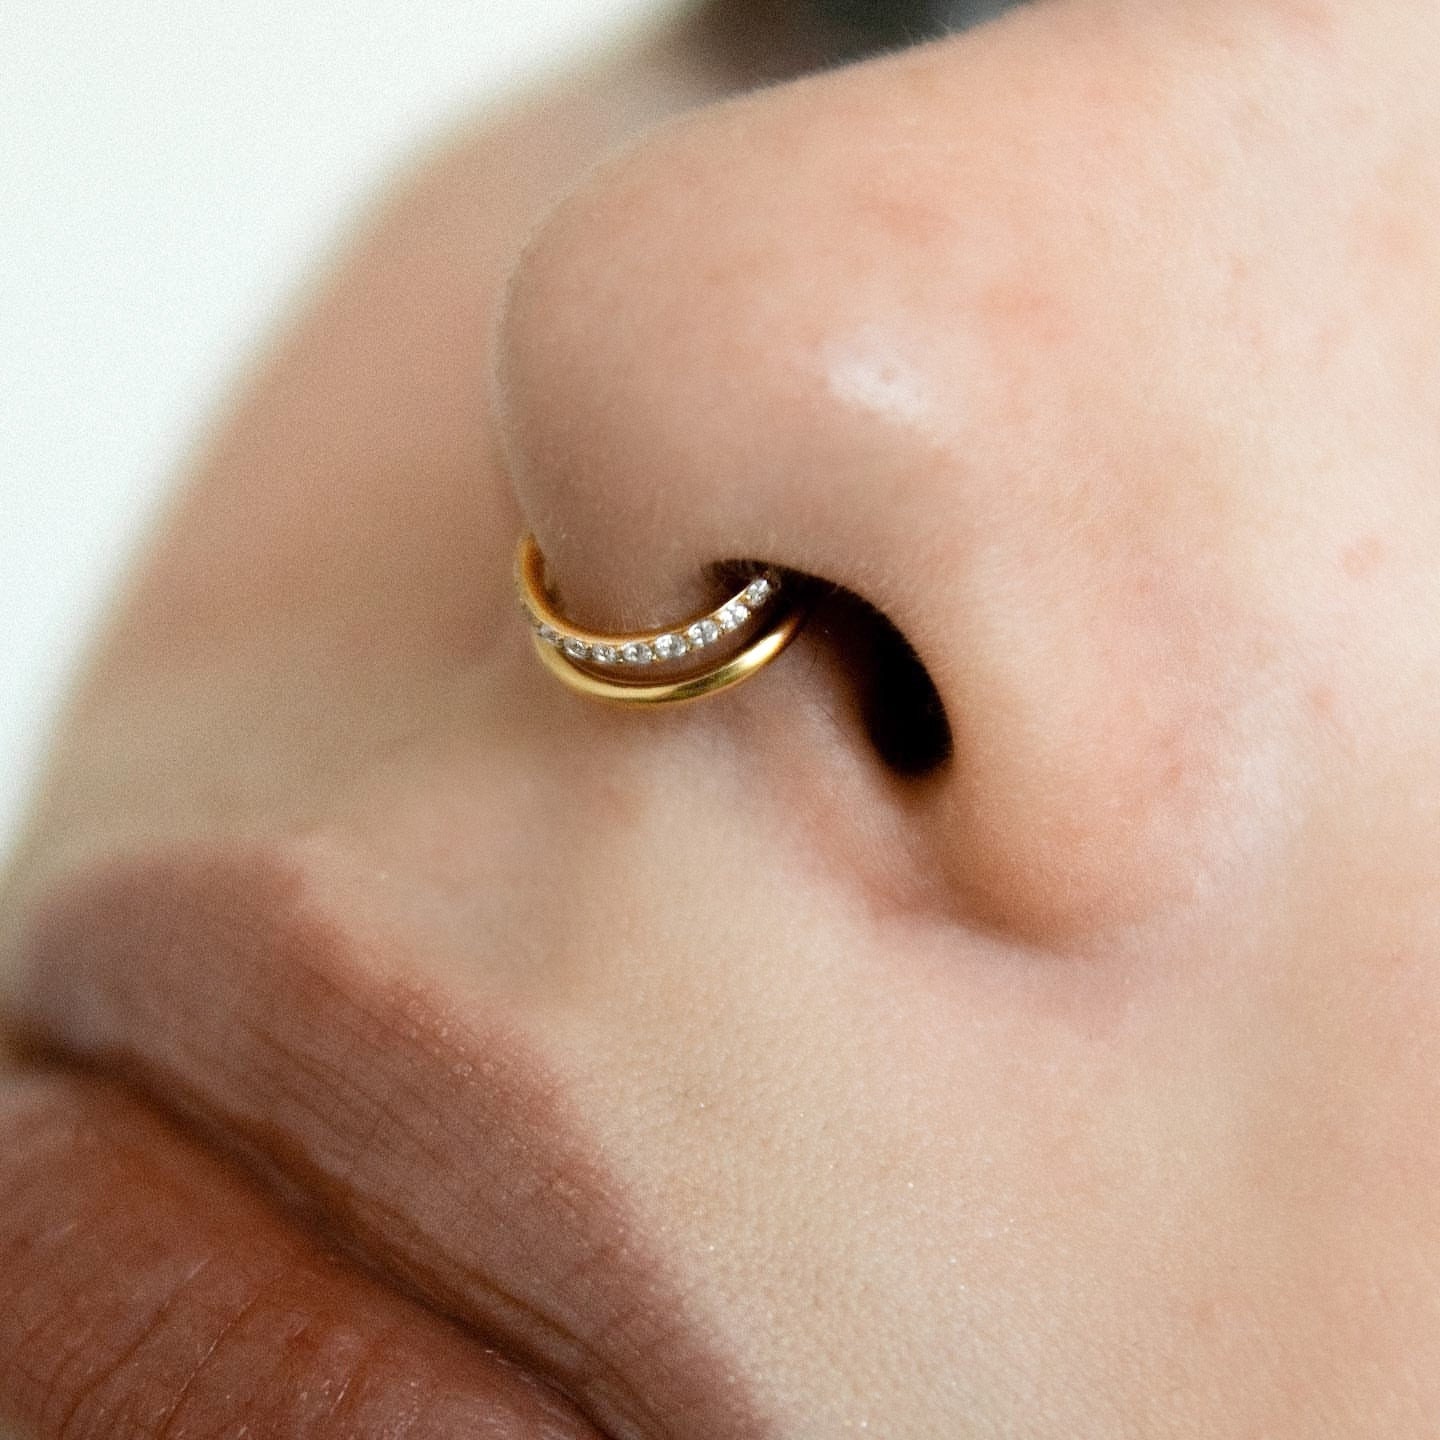 18KT Solid Gold Fixed Bead Nose Ring Hoop Septum 5/16